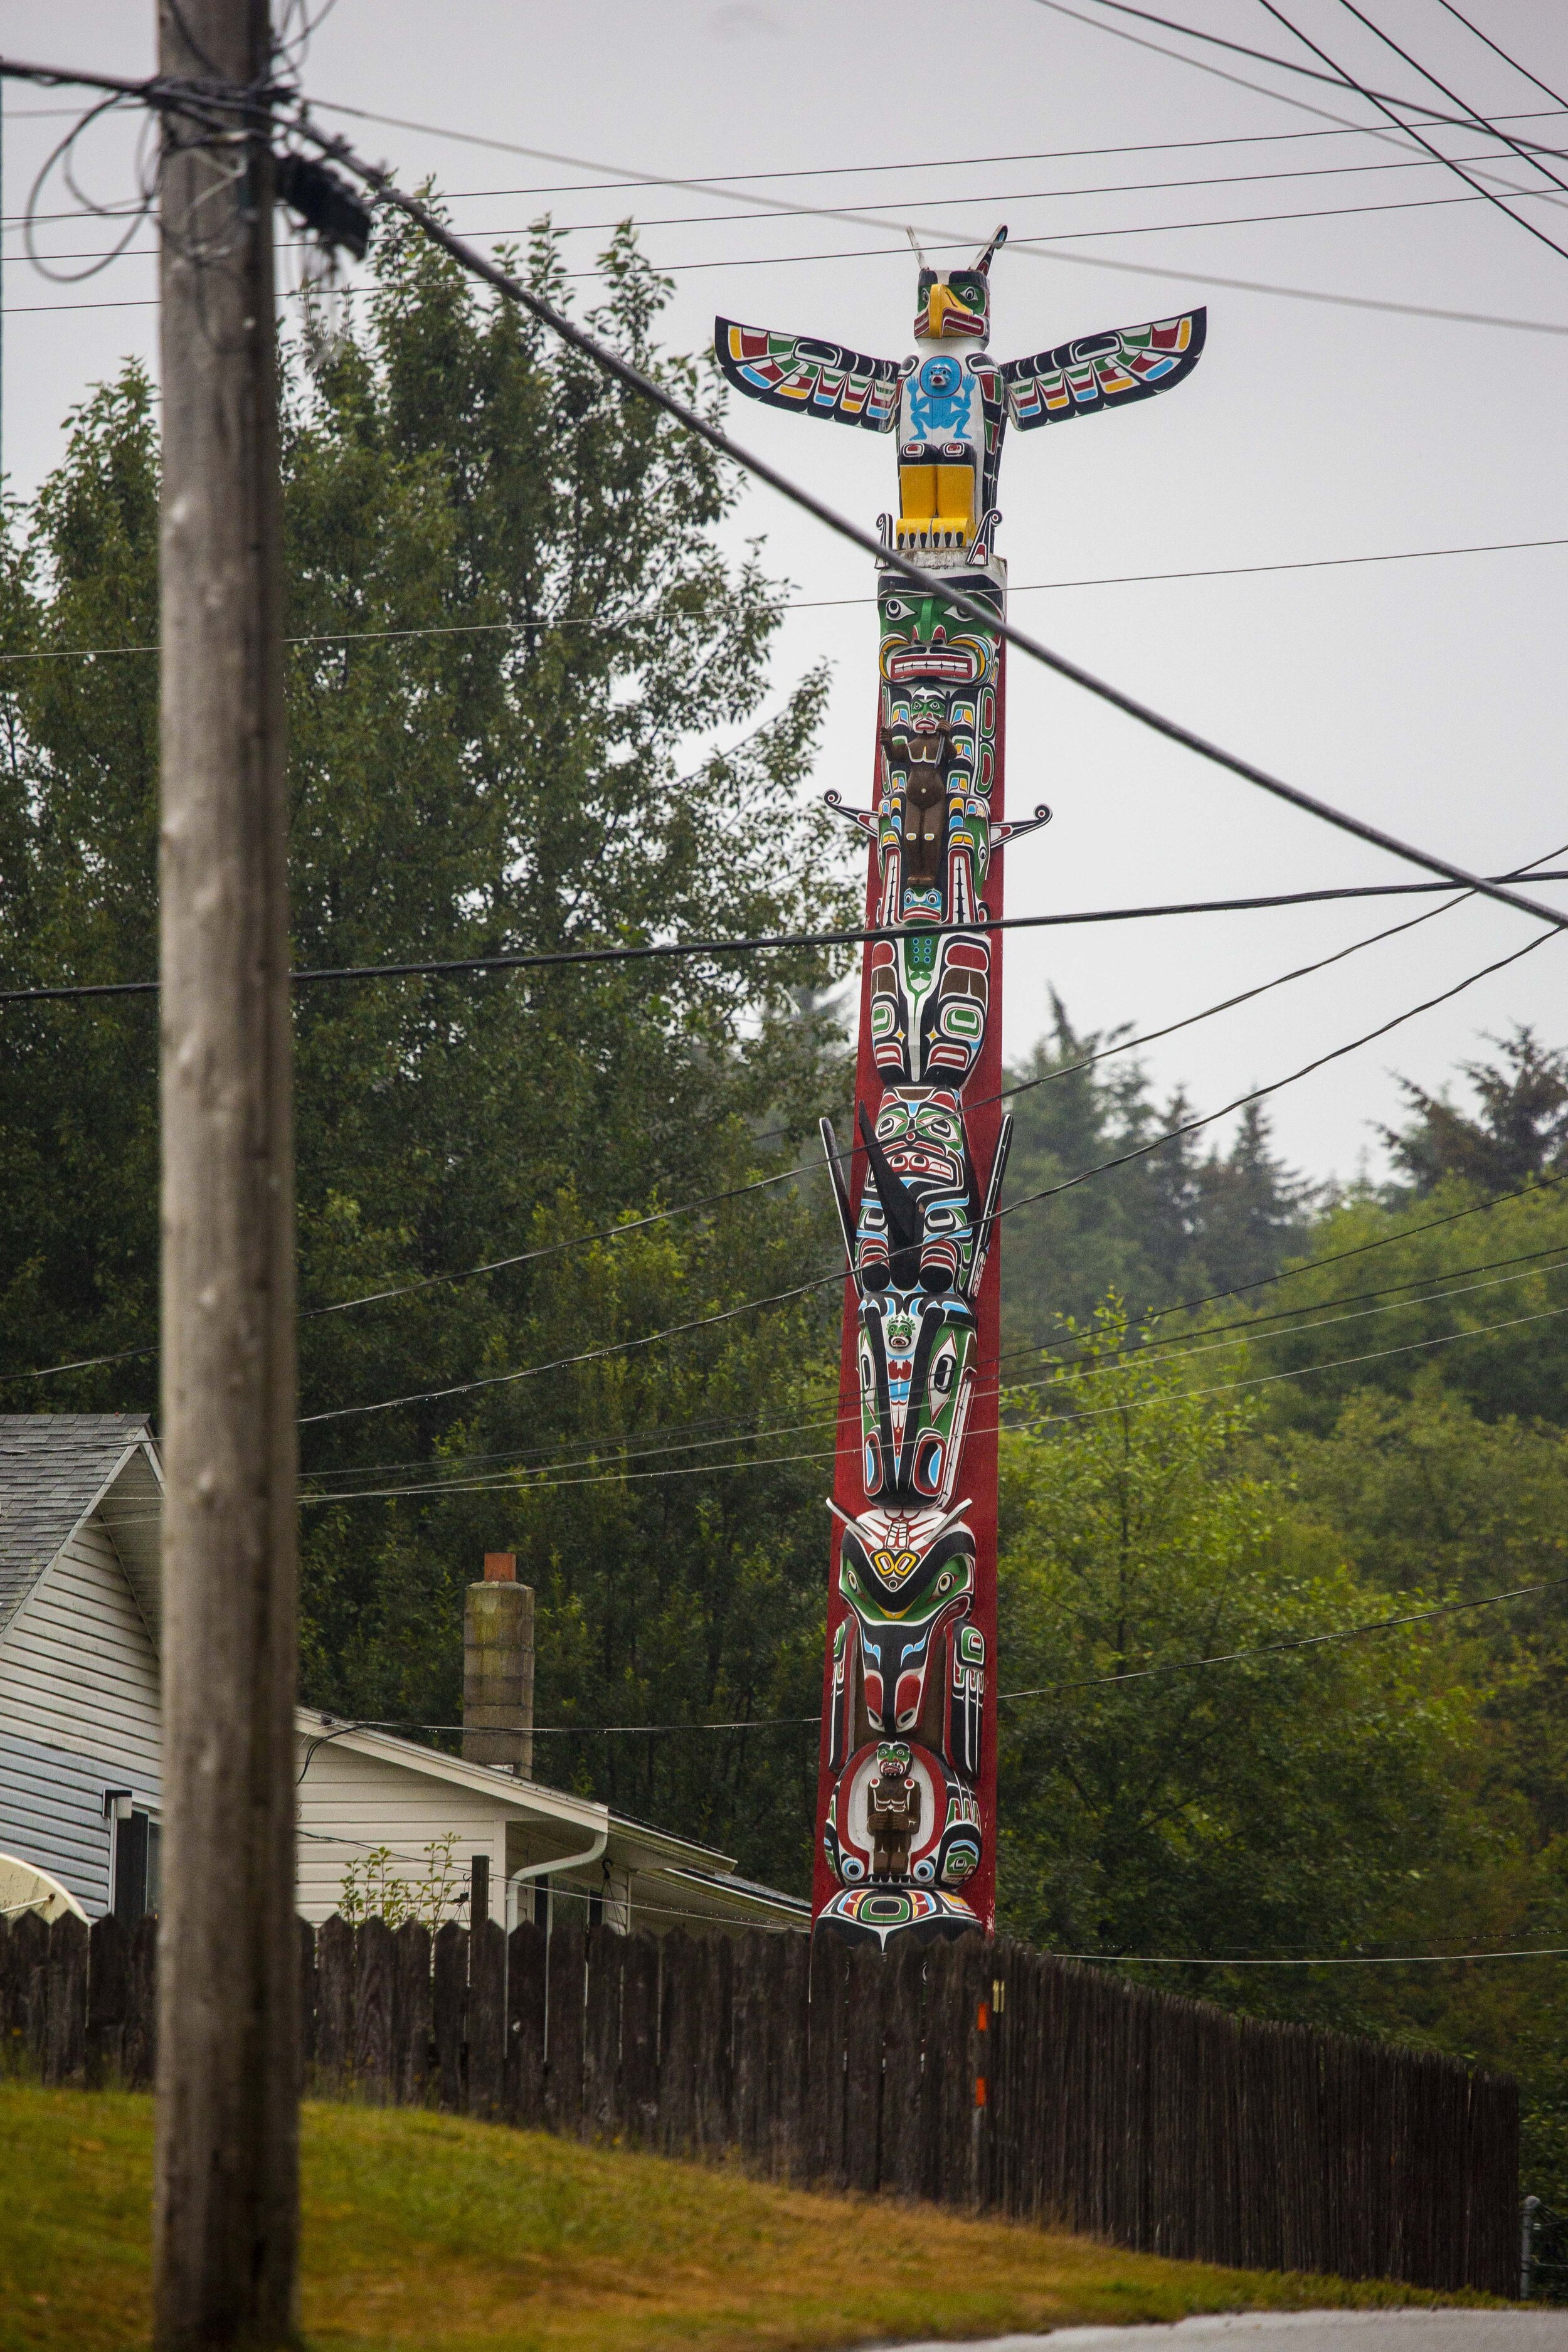  A totem pole in the front yard of a house in Alert Bay, home of the Namgis First Nation. 